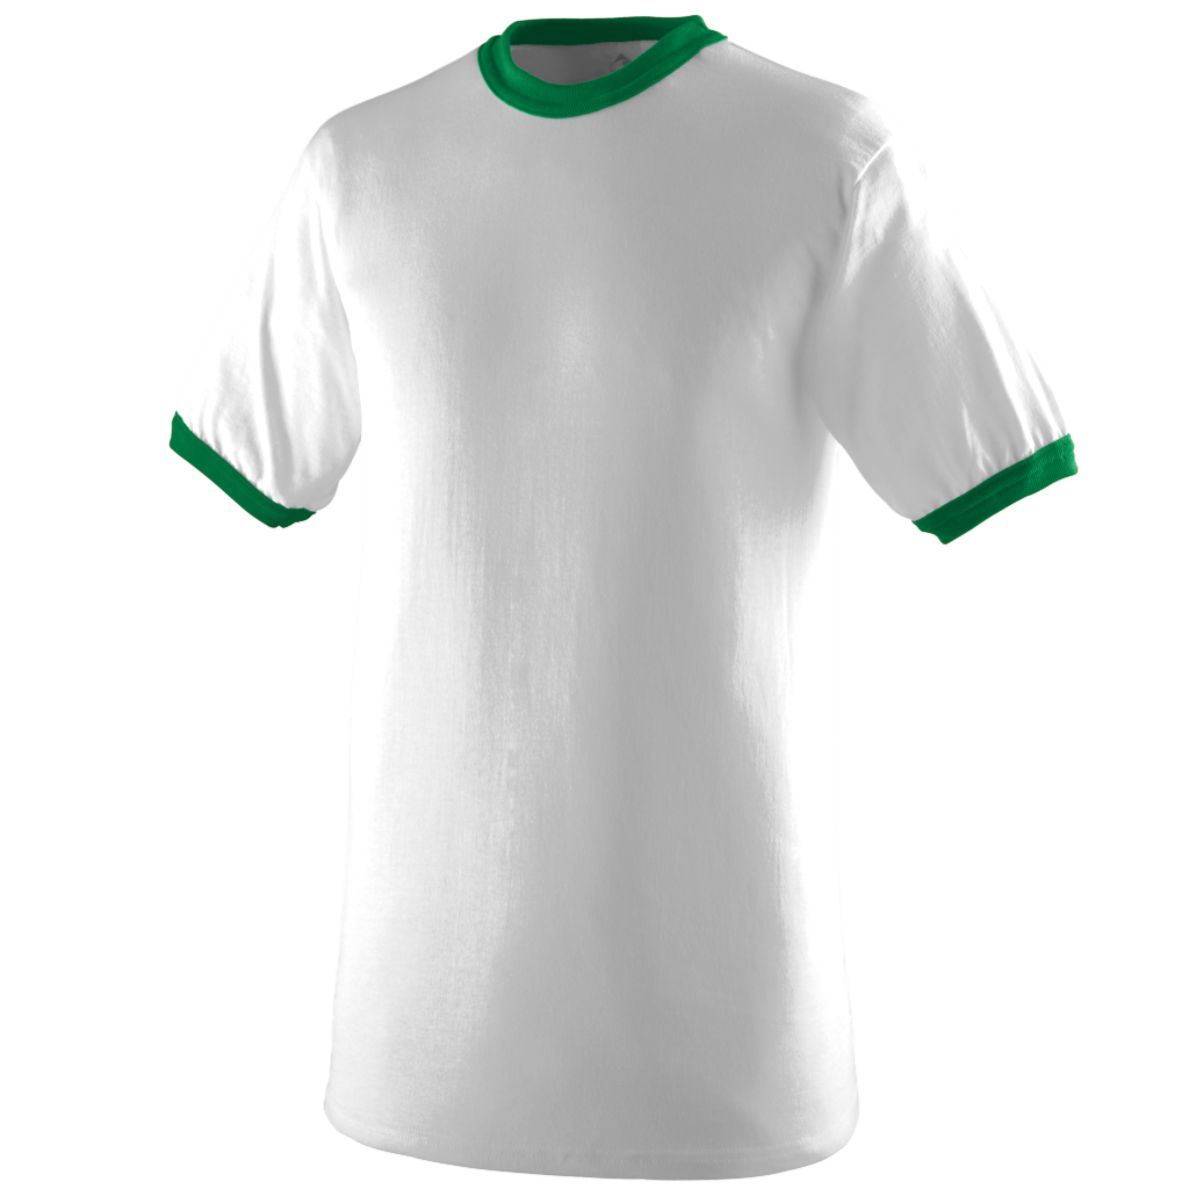 Augusta Sportswear Youth-Ringer T-Shirt in White/Kelly  -Part of the Youth, Youth-Tee-Shirt, T-Shirts, Augusta-Products, Soccer, Shirts, All-Sports-1 product lines at KanaleyCreations.com